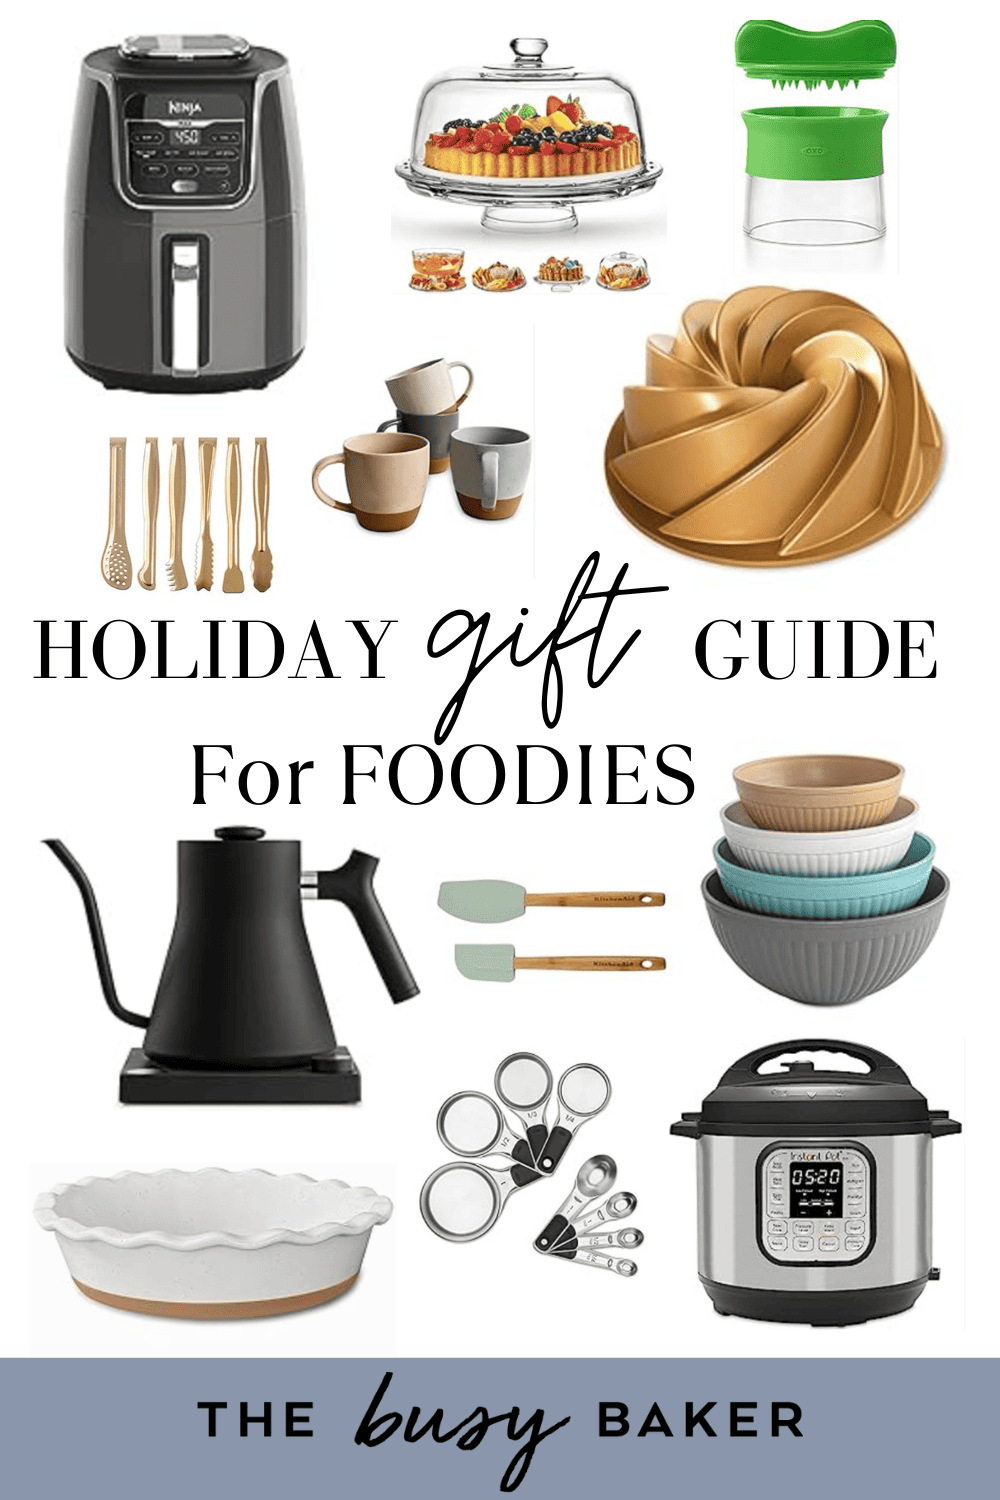 50 Gift Ideas for Foodies!! If you can't decide what to buy for the happy cook or aspiring home chef in your life, look no further for the best foodie gifts everyone on your list will love! thebusybaker.ca #giftguide #foodies #foodgifts #kitchen #baking #cooking #christmas #christmasgifts via @busybakerblog